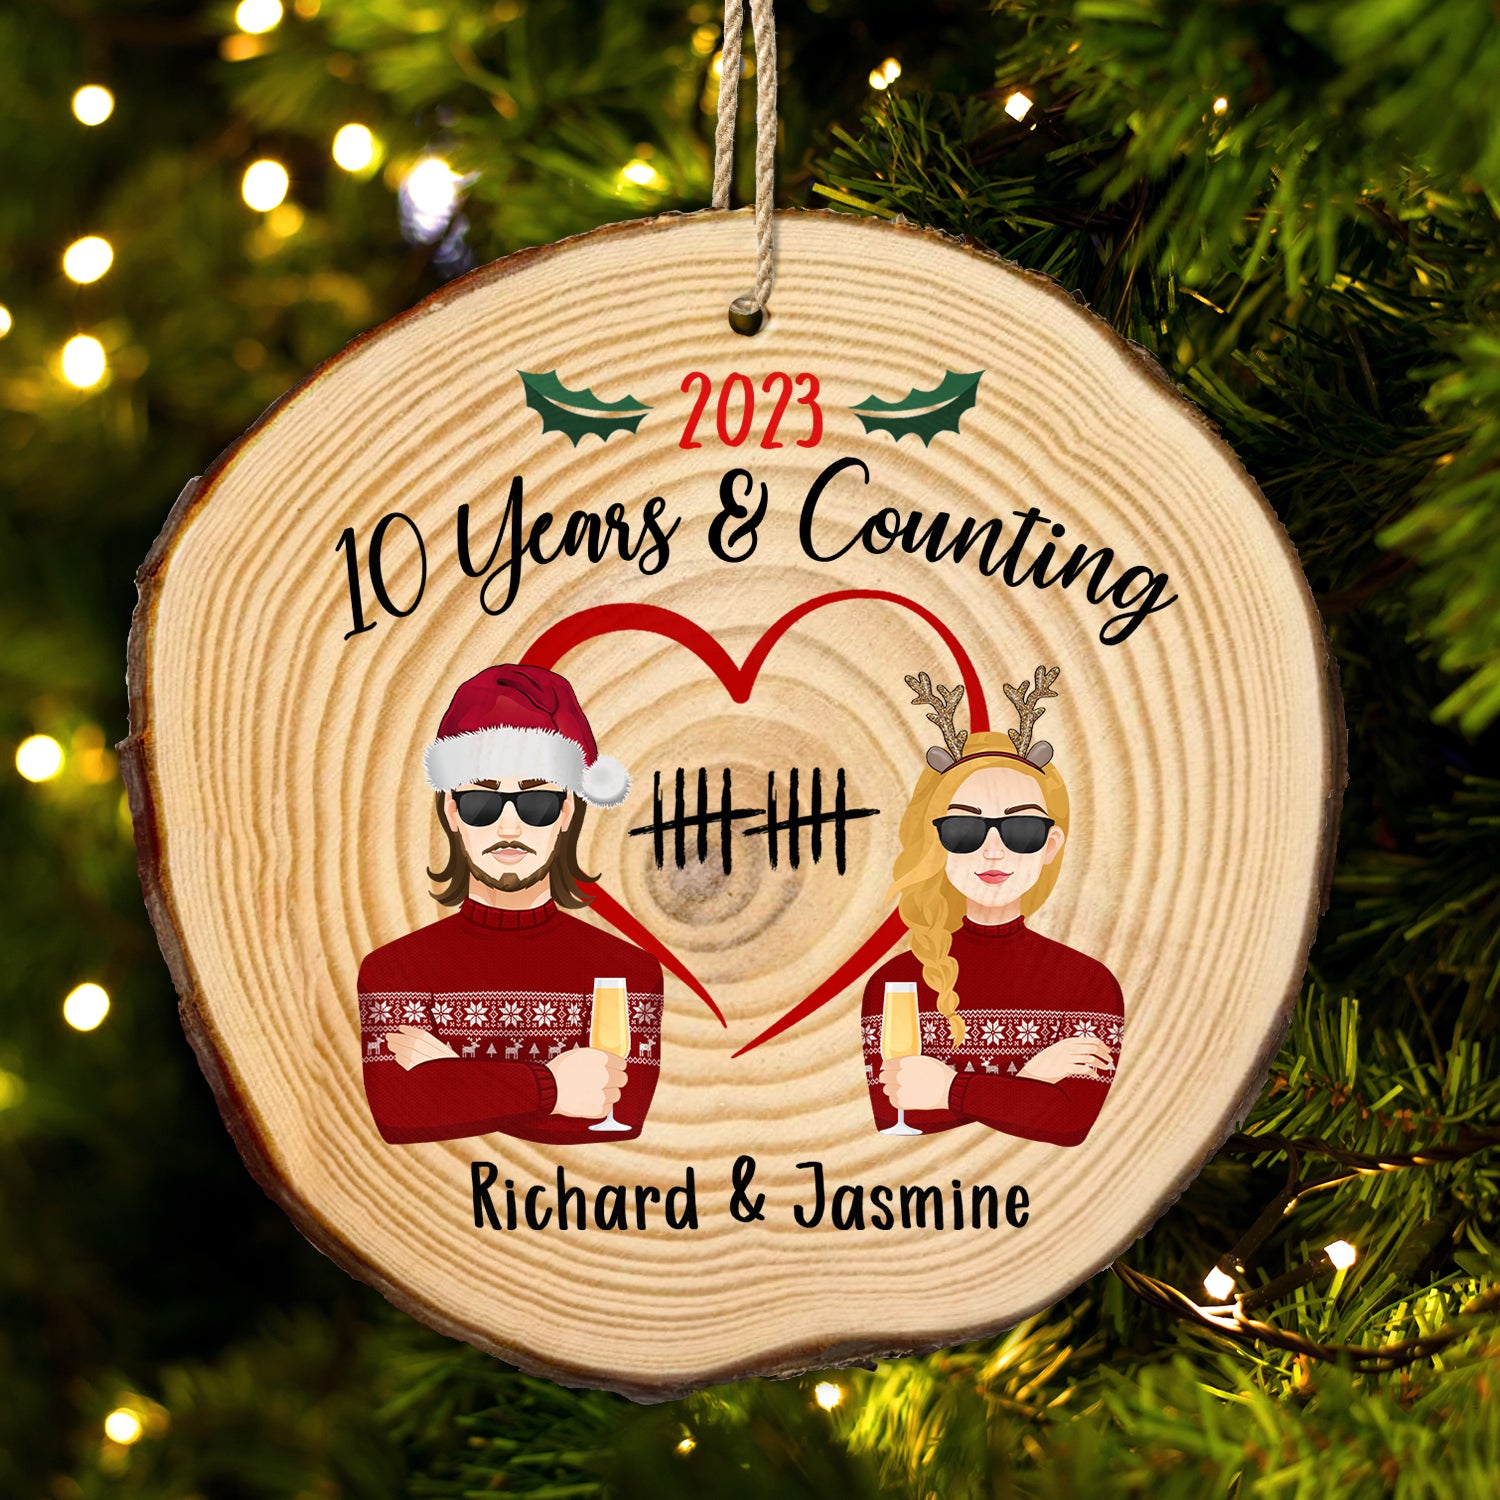 And Counting - Christmas Gift For Couples - Personalized Wood Slice Ornament